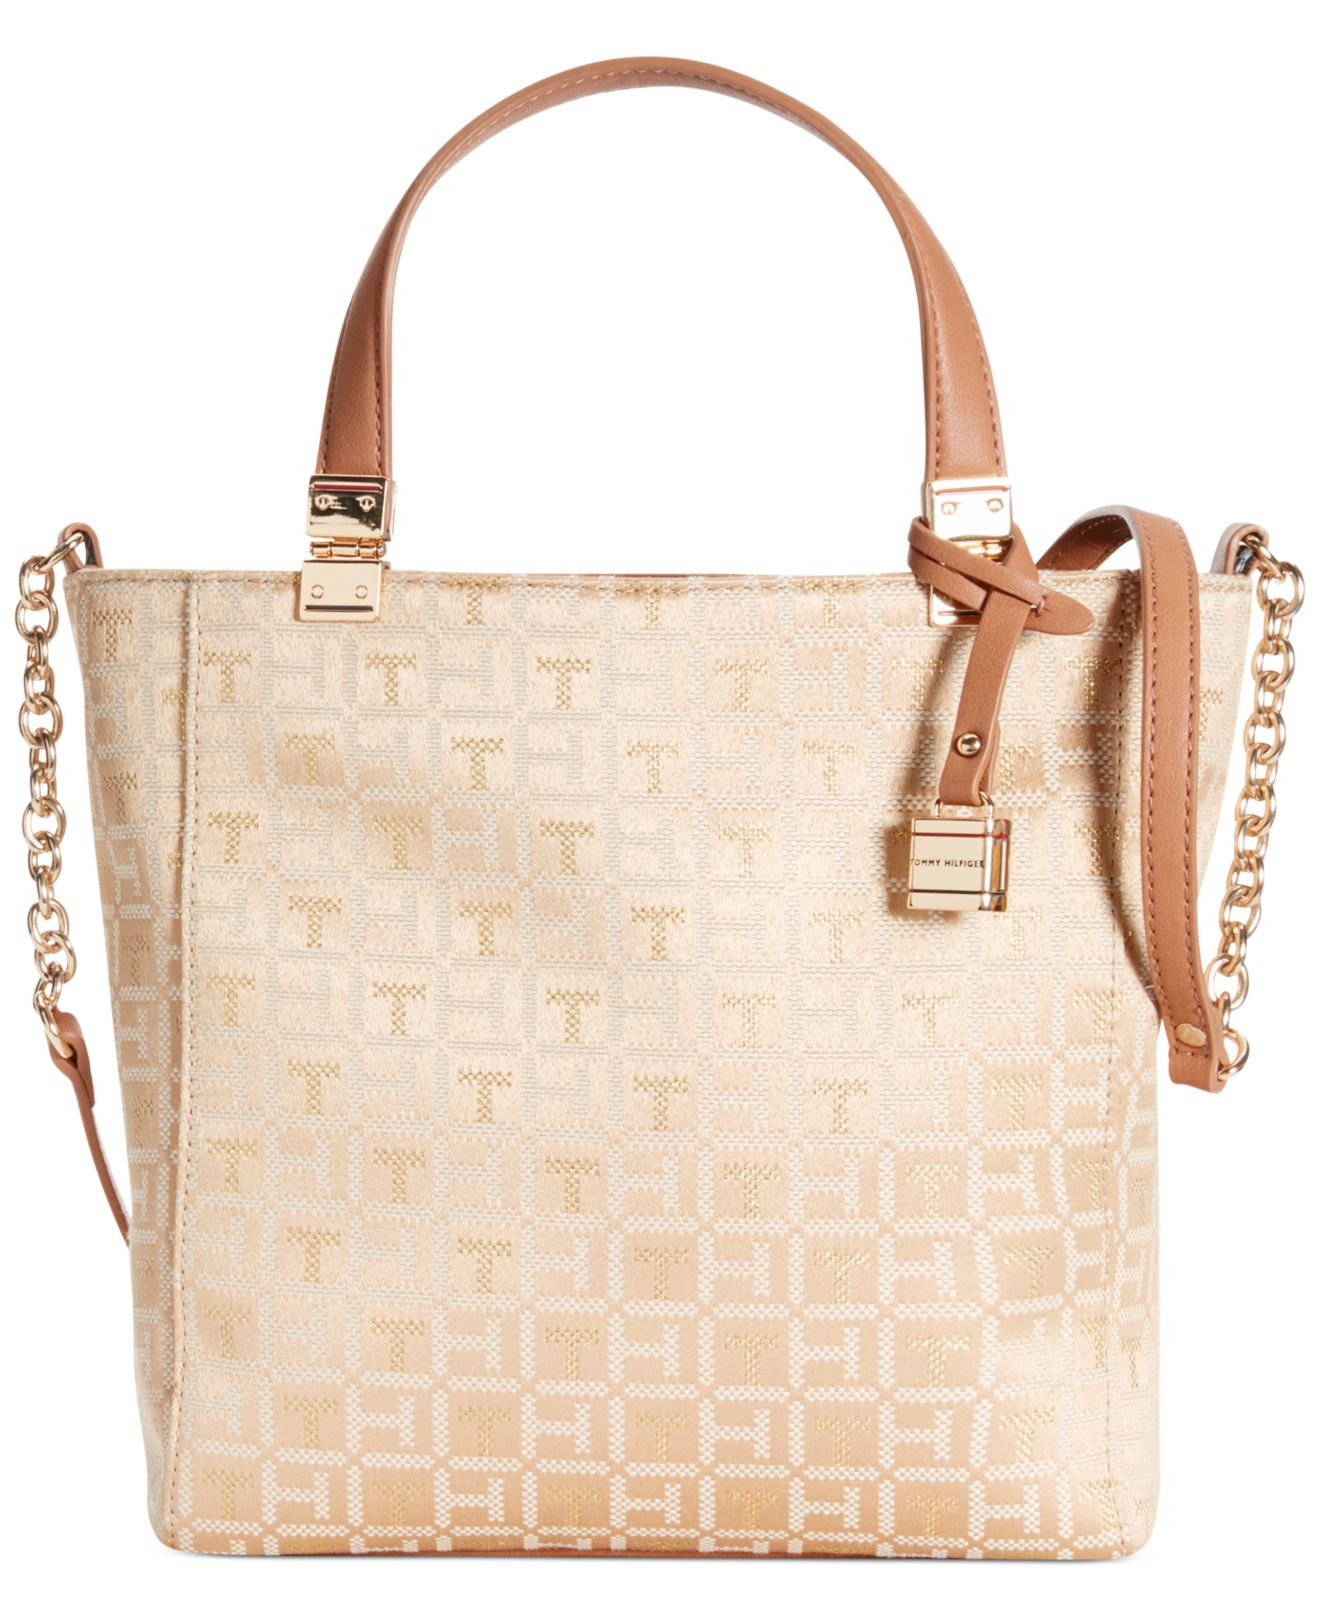 Lyst - Tommy hilfiger Th Hinge Monogram Jacquard Convertible Small Ns Tote in Natural